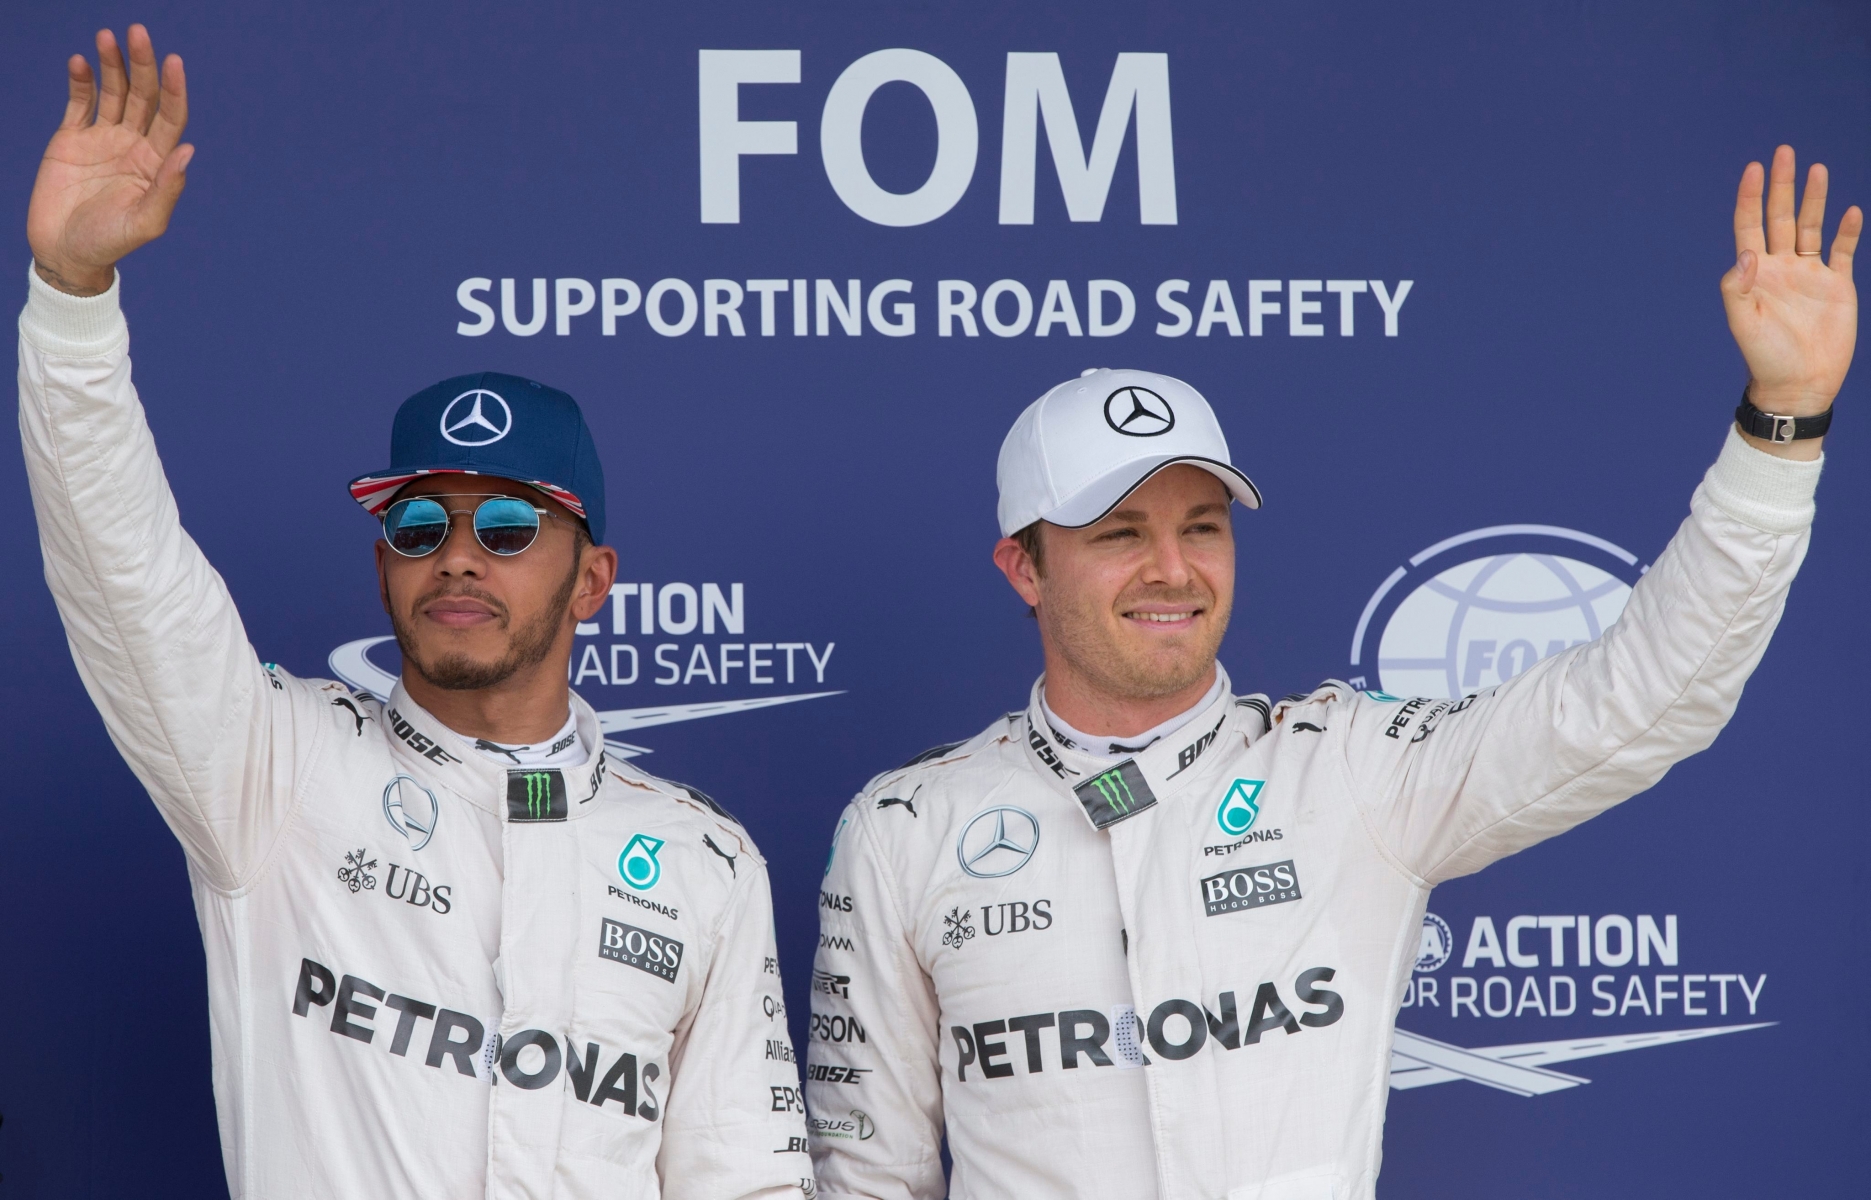 epa05416876 British Formula One driver Lewis Hamilton of Mercedes AMG GP (L) and German Formula One driver Nico Rosberg of Mercedes AMG GP (R) celebrate after the qualifying session at Silverstone race track, Britain, 09 July 2016.  Lewis Hamilton took pole position while Nico Rosberg second. The 2016 Formula One Grand Prix of Great Britain will take place on Sunday 10 July.  EPA/VALDRIN XHEMAJ BRITAIN FORMULA ONE GRAND PRIX